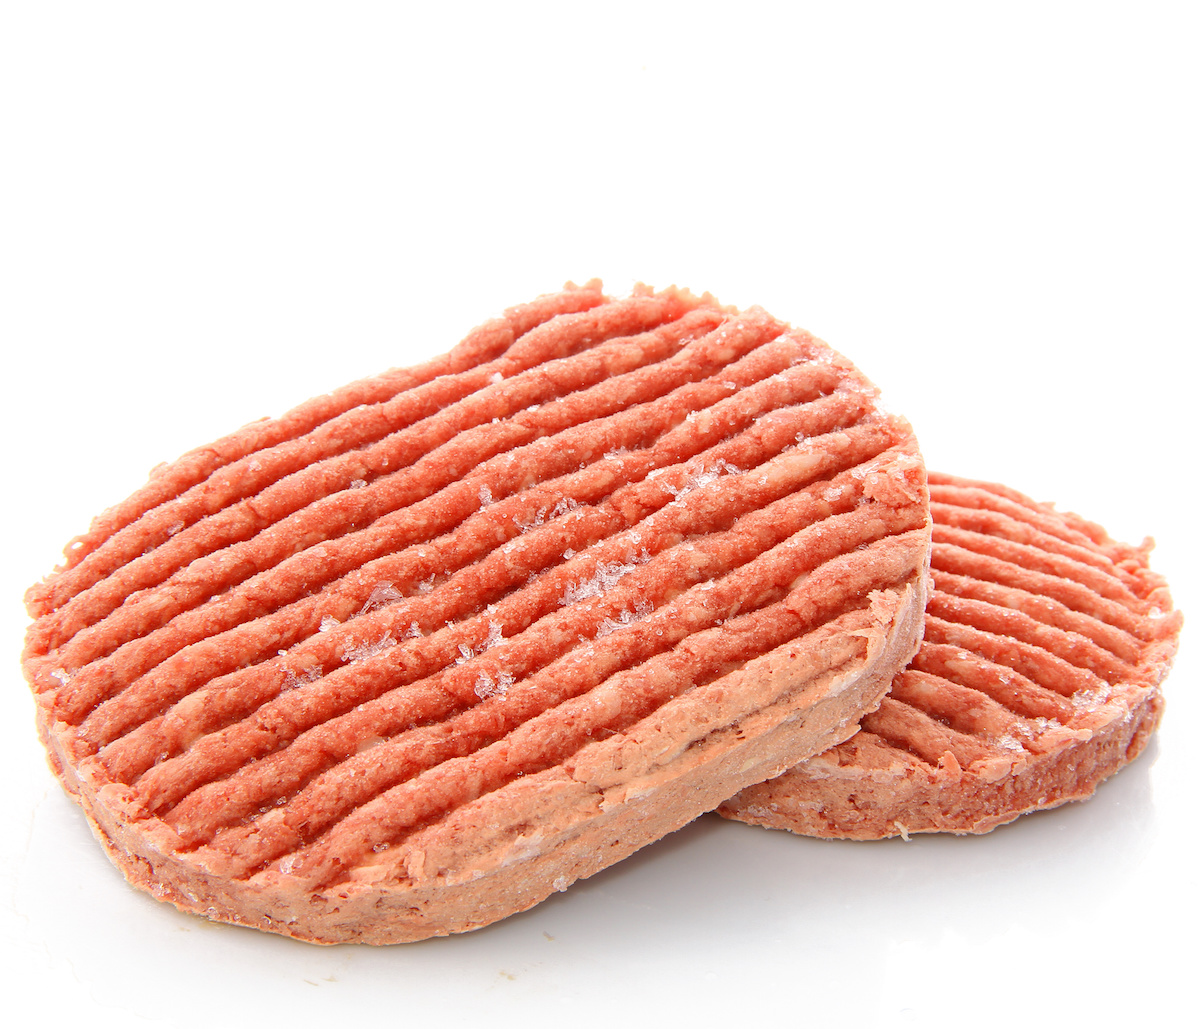 JSB Ground Beef Recall - 100,000 Pounds Recalled for E. Coli Scare